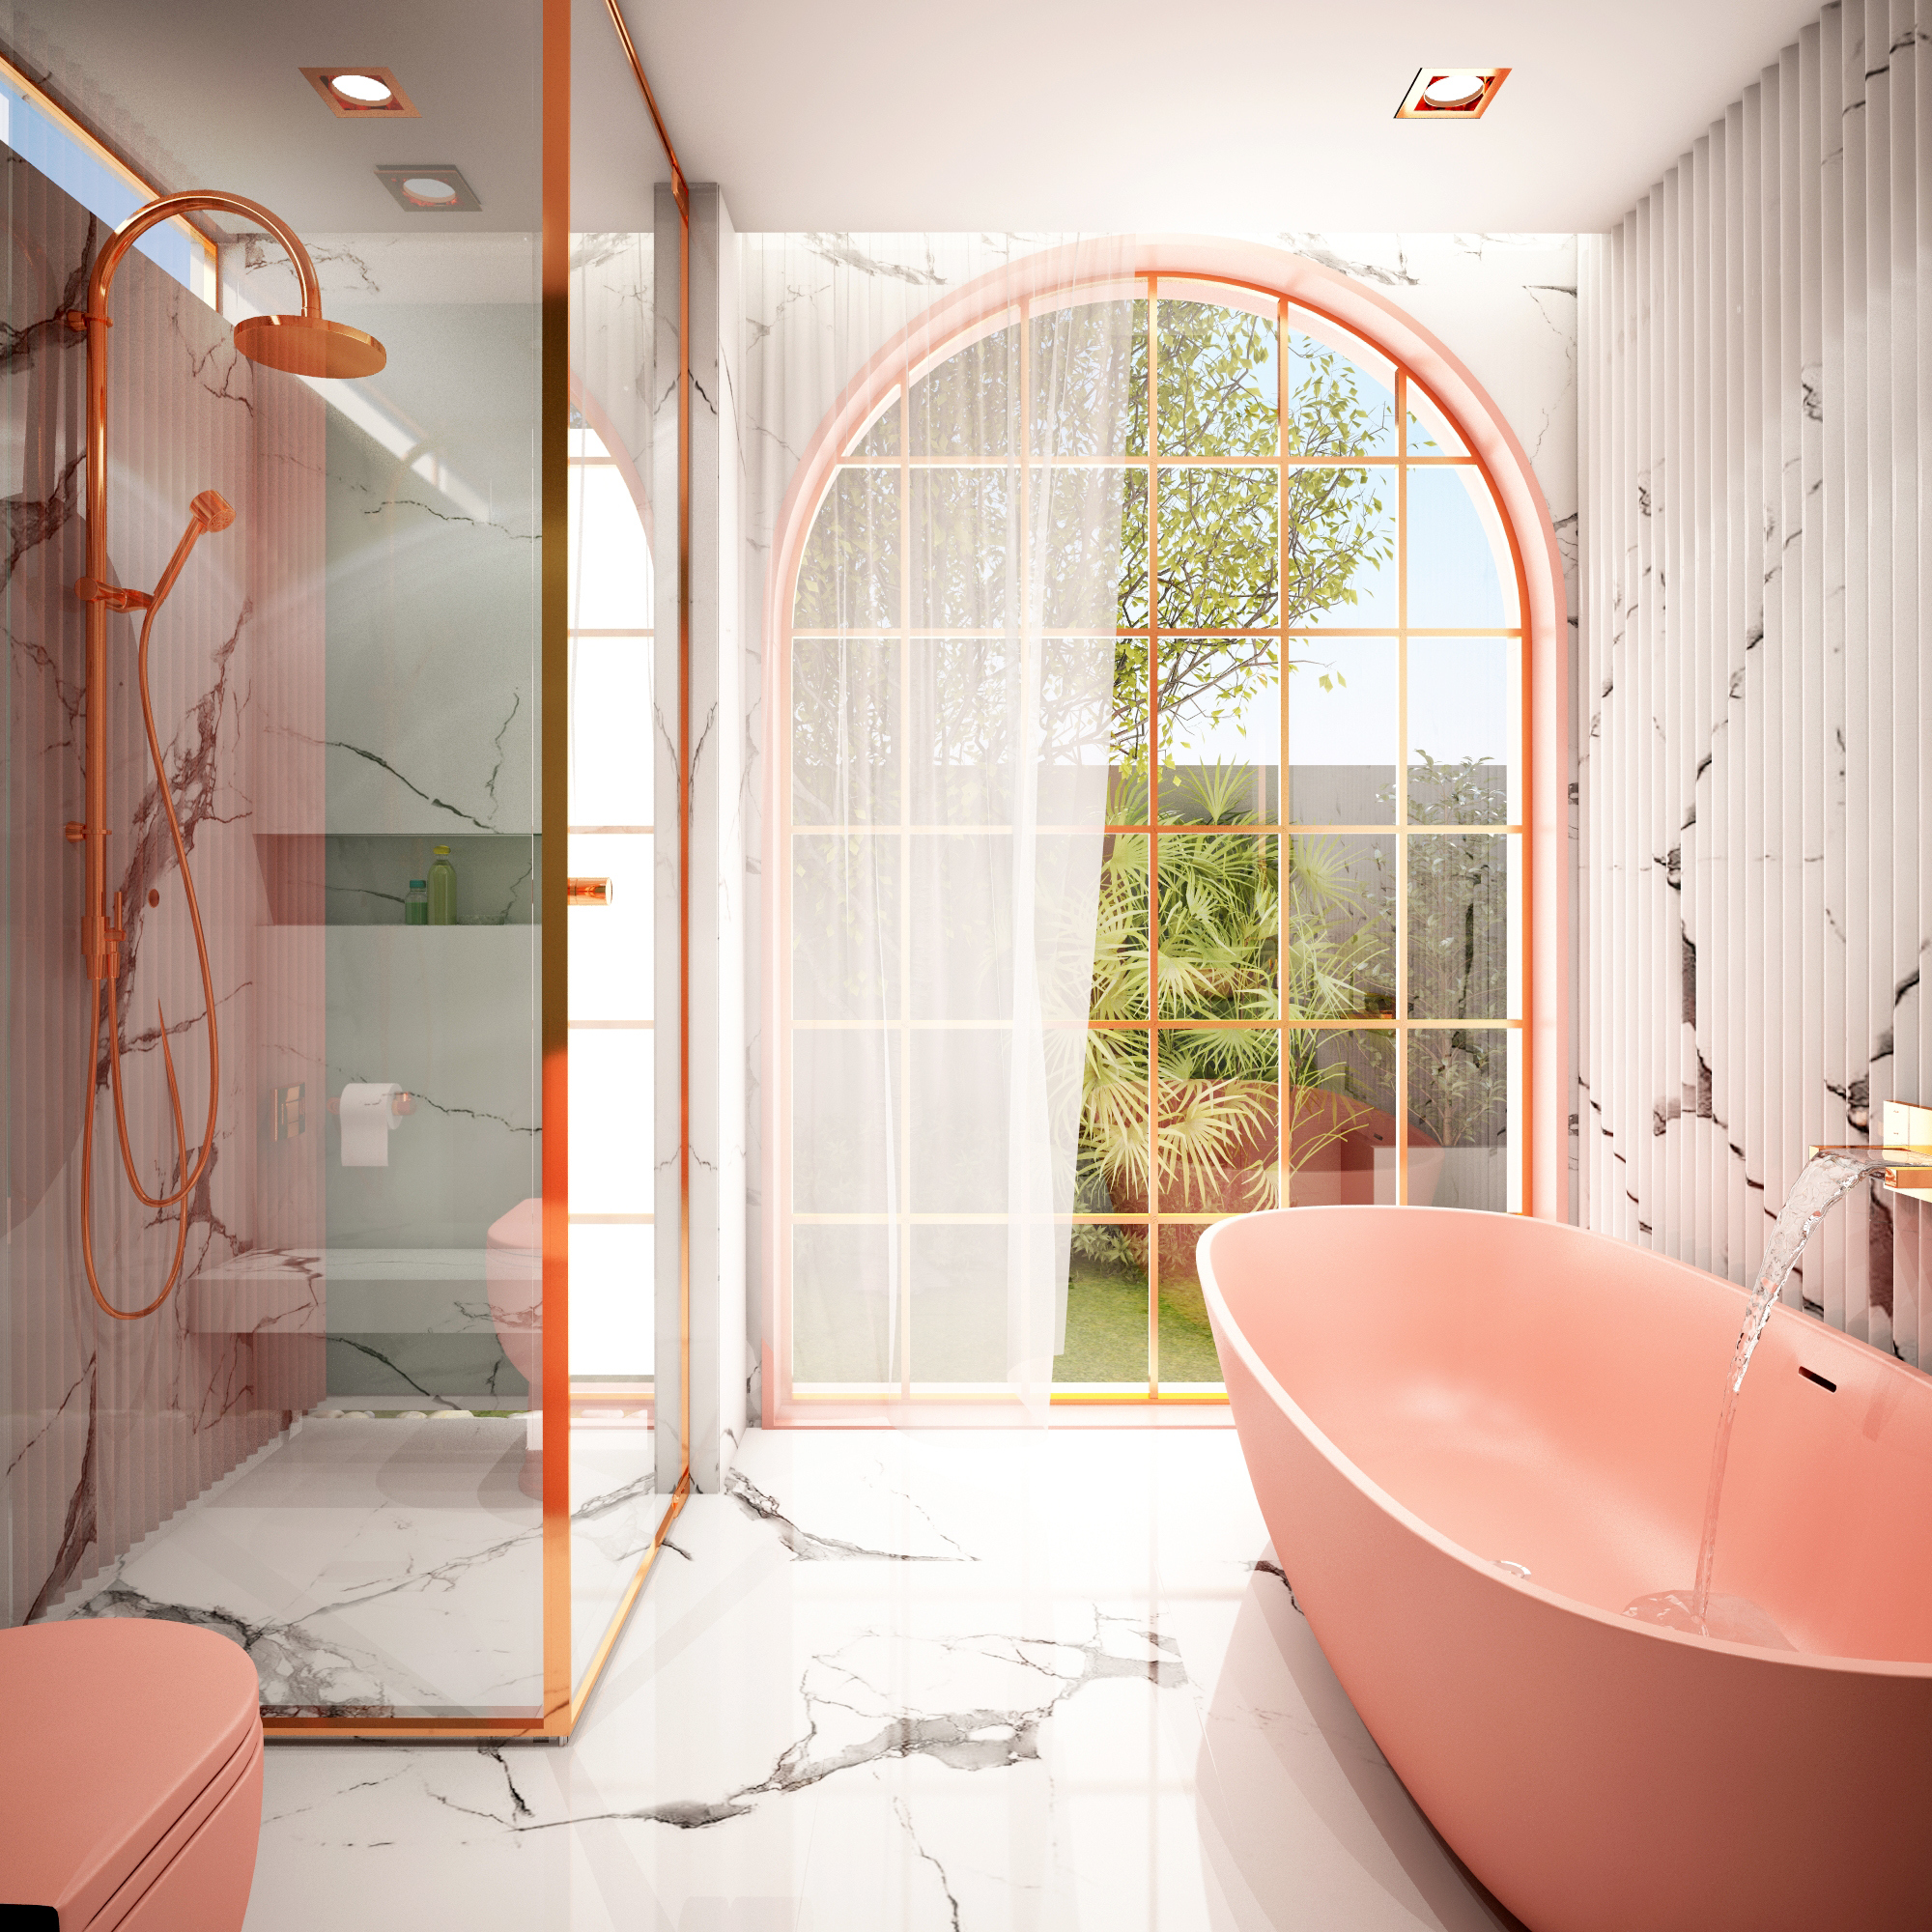 Peachy Pink adds femininity and warmth, evoking nostalgia for a cozy, charming bathroom ambiance.